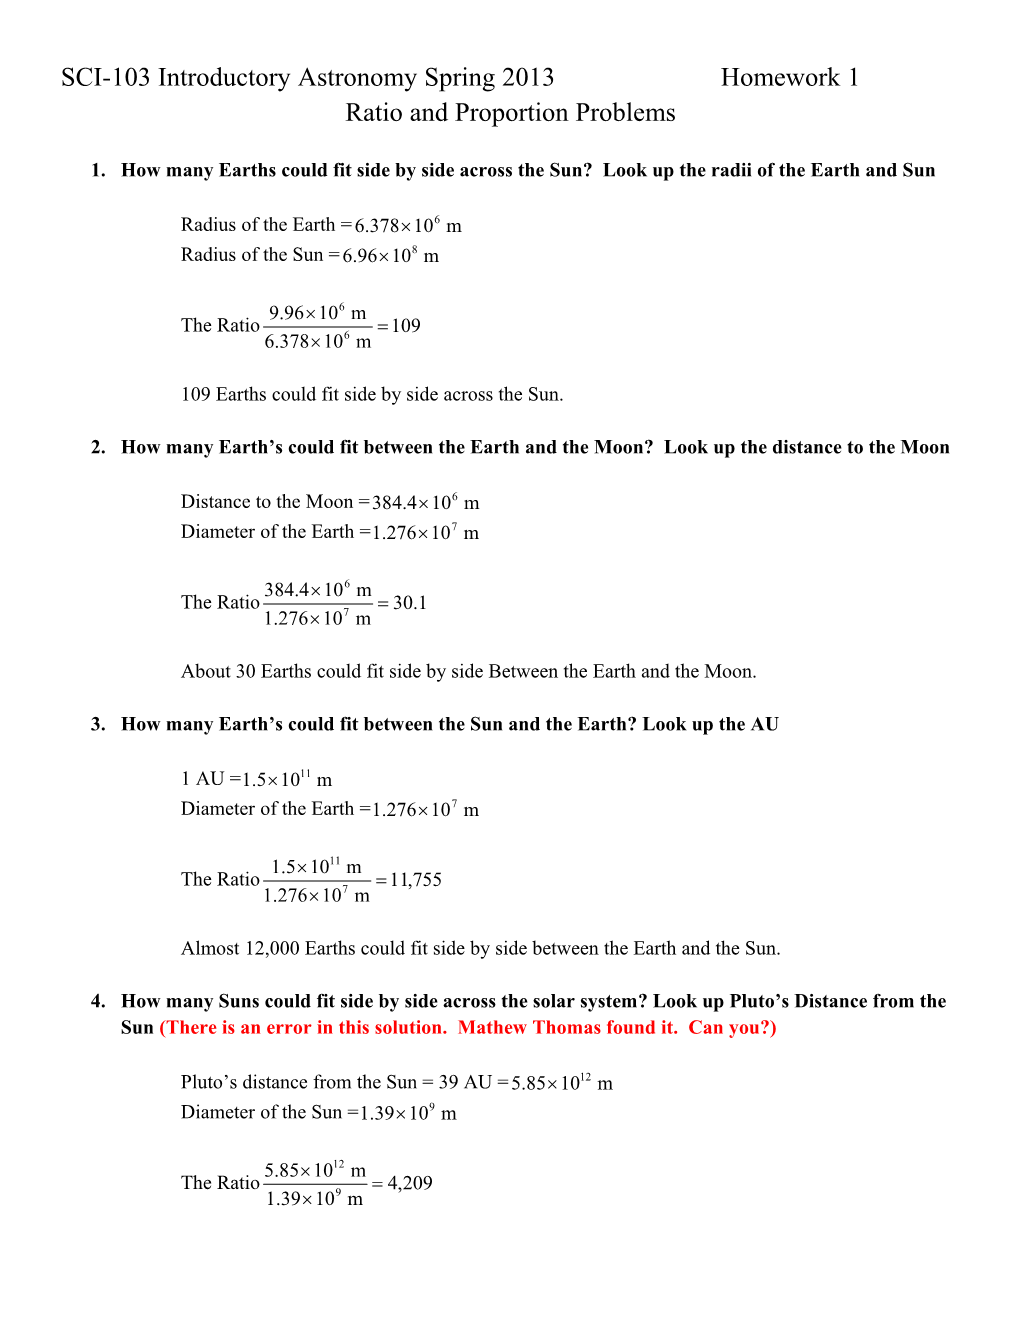 SCI-103 Introductory Astronomy Spring 2013 Homework 1